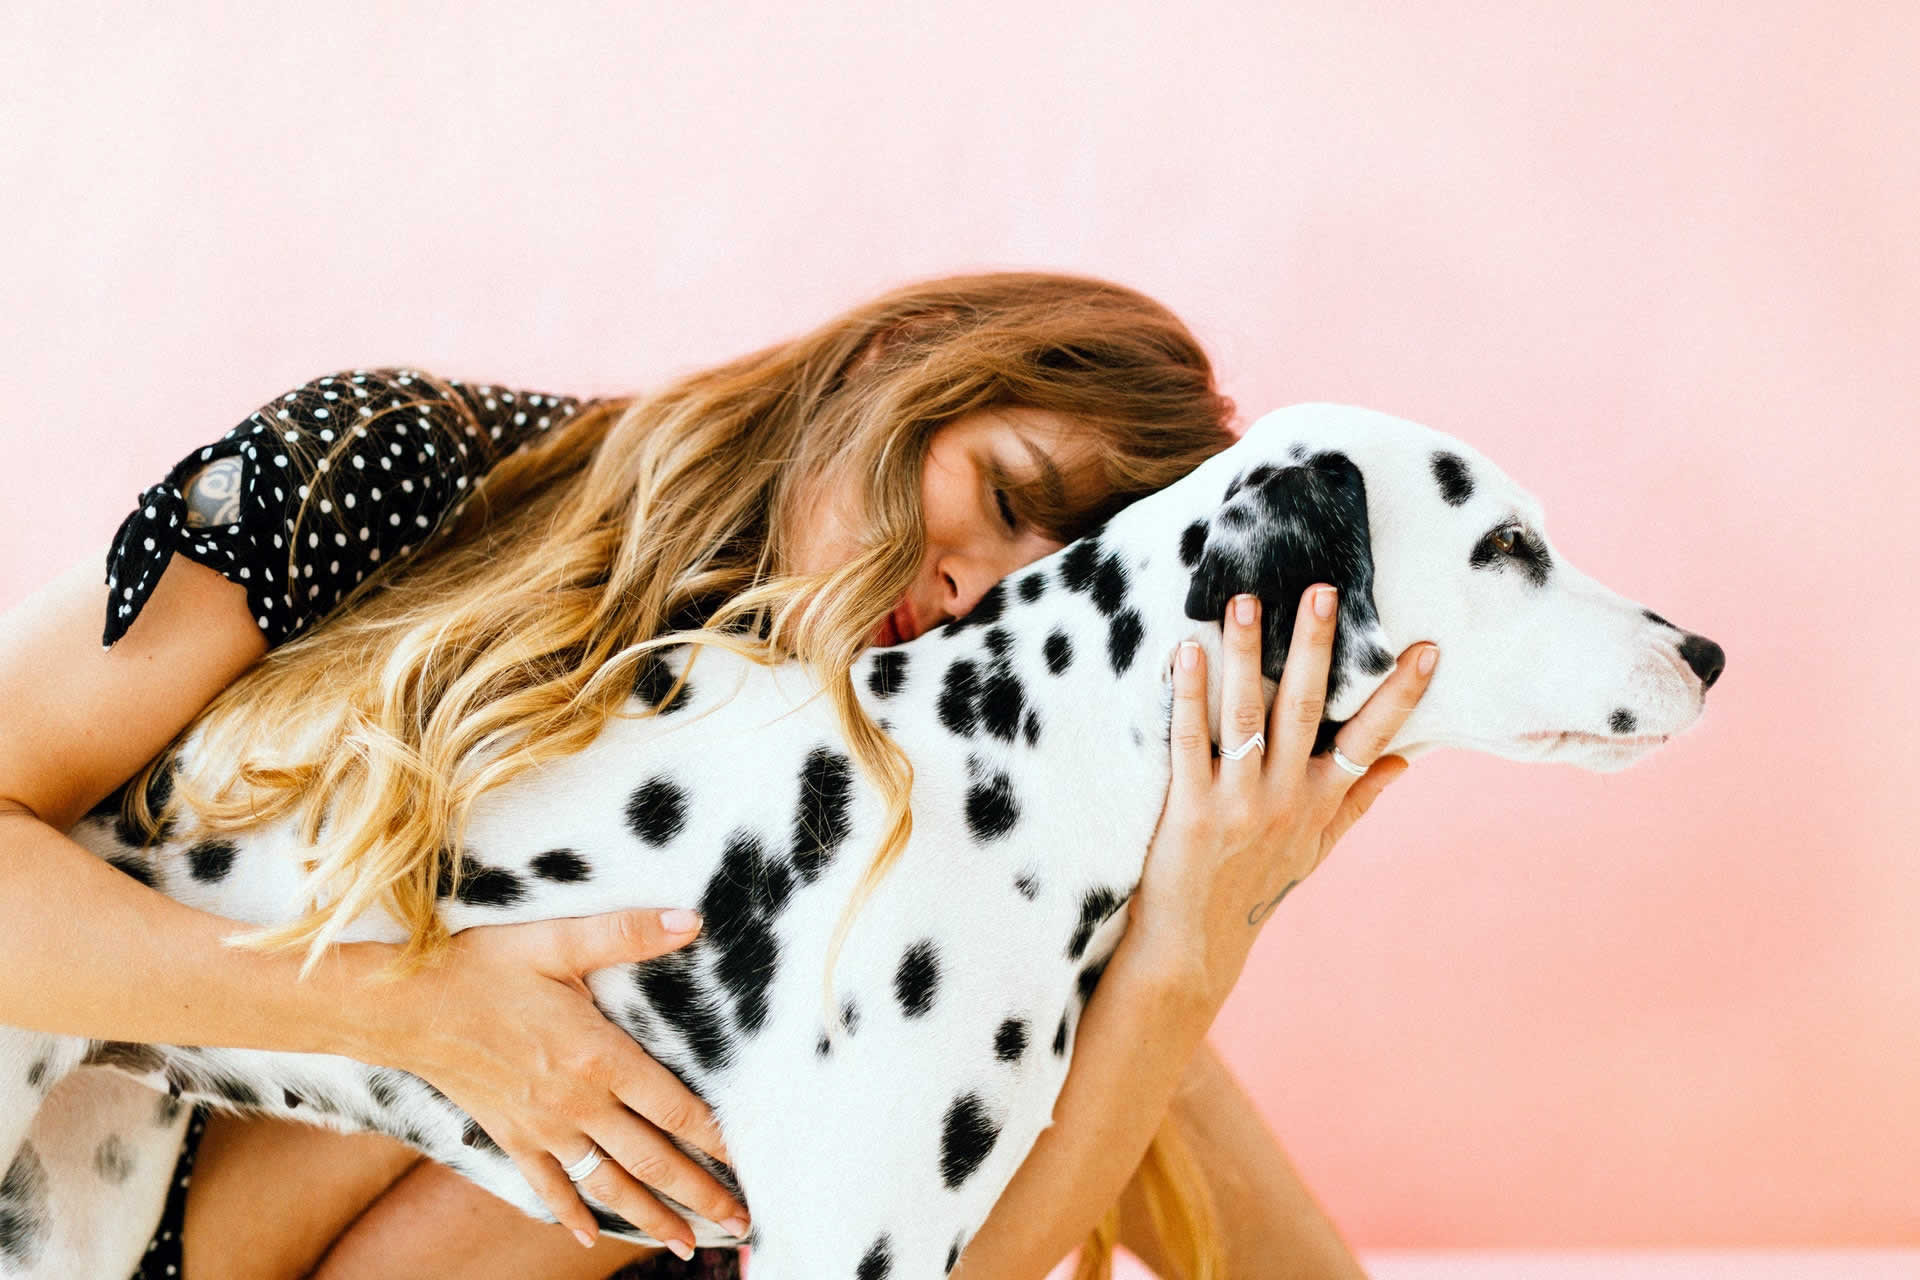 A woman hugging a dalmatian dog on a pink background.